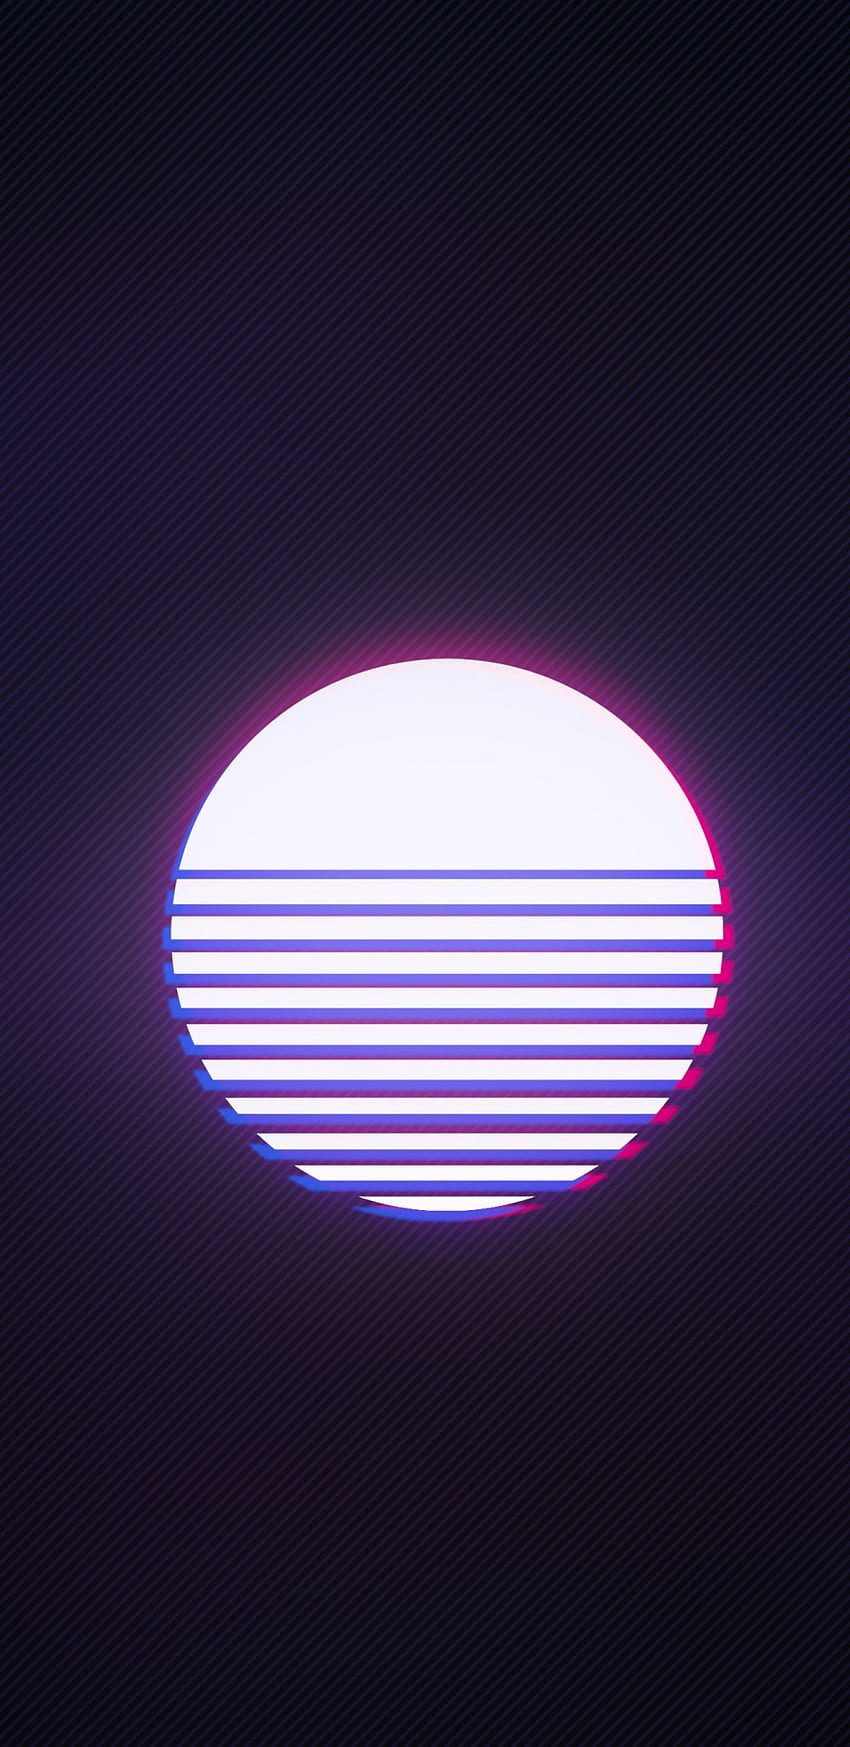 Sun, Retro Wave, Synthwave, Music for Samsung Galaxy S9, Note 9, S8, S8+, Google Pixel 3 XL, 90s Retro Wave HD phone wallpaper